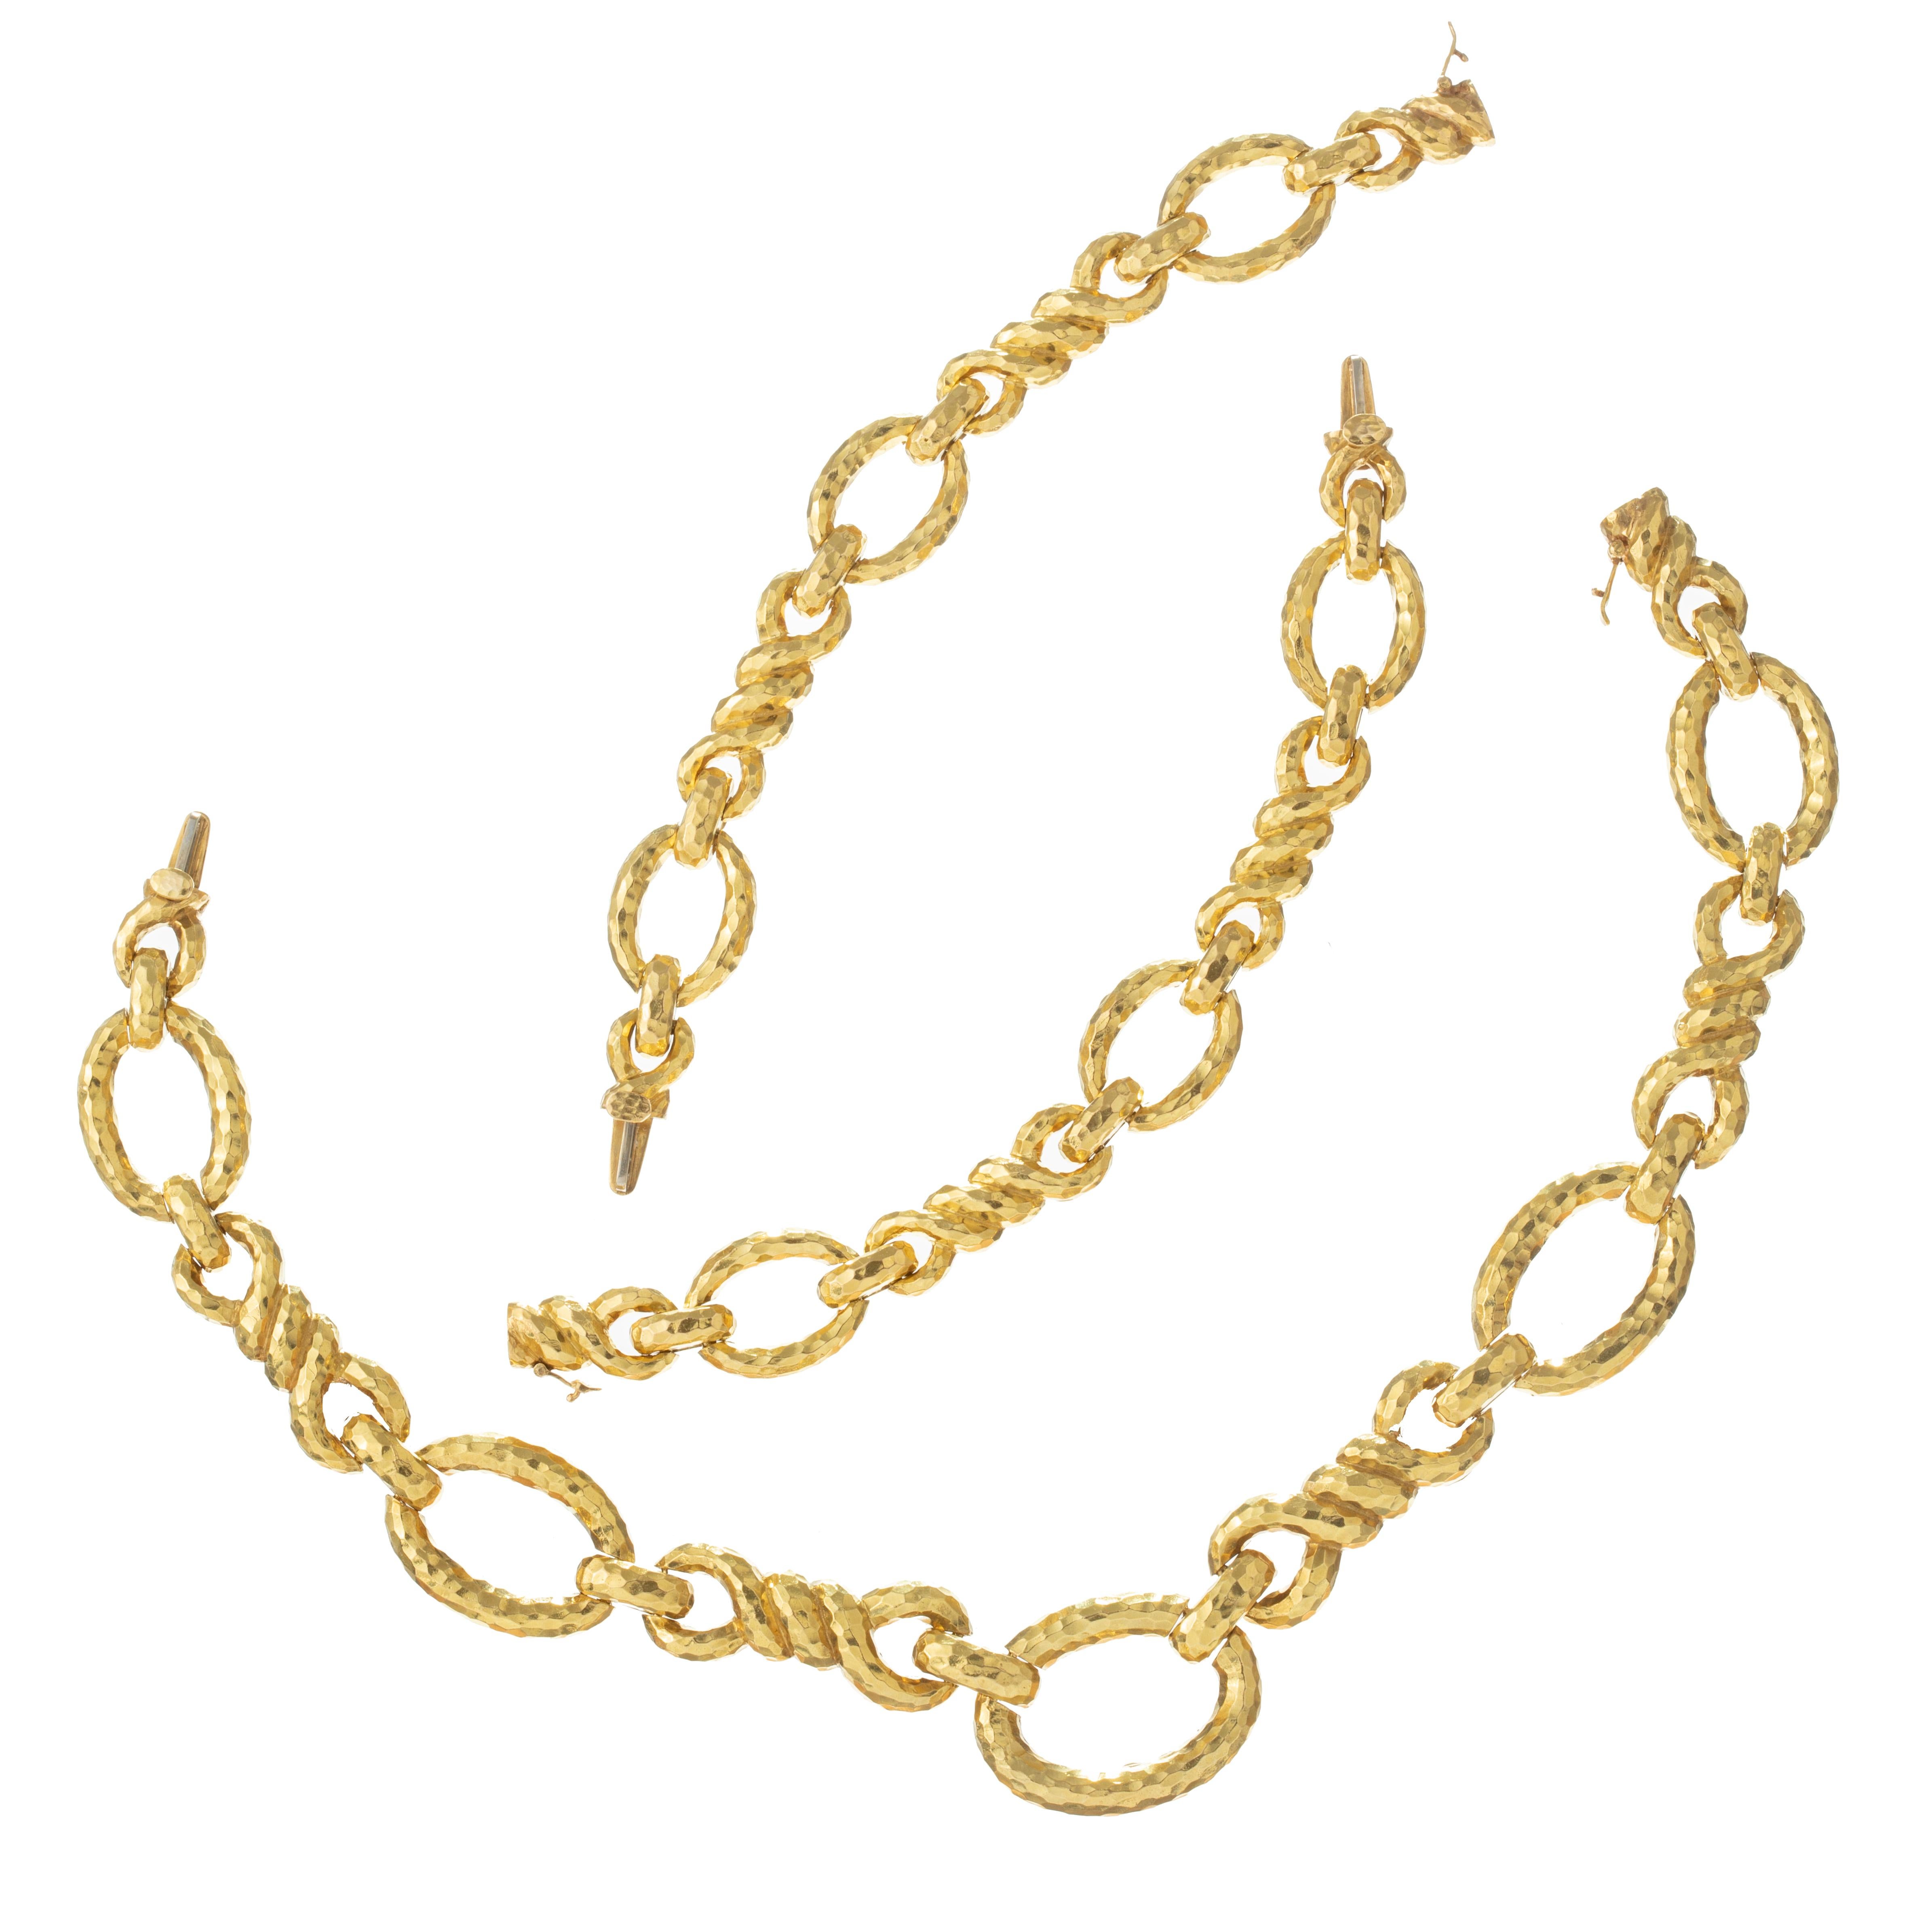 David Webb 1970s long link necklace in hammered 18k yellow gold.  Necklace converts into a collar necklace with two matching link bracelets.  Necklace measuring 30